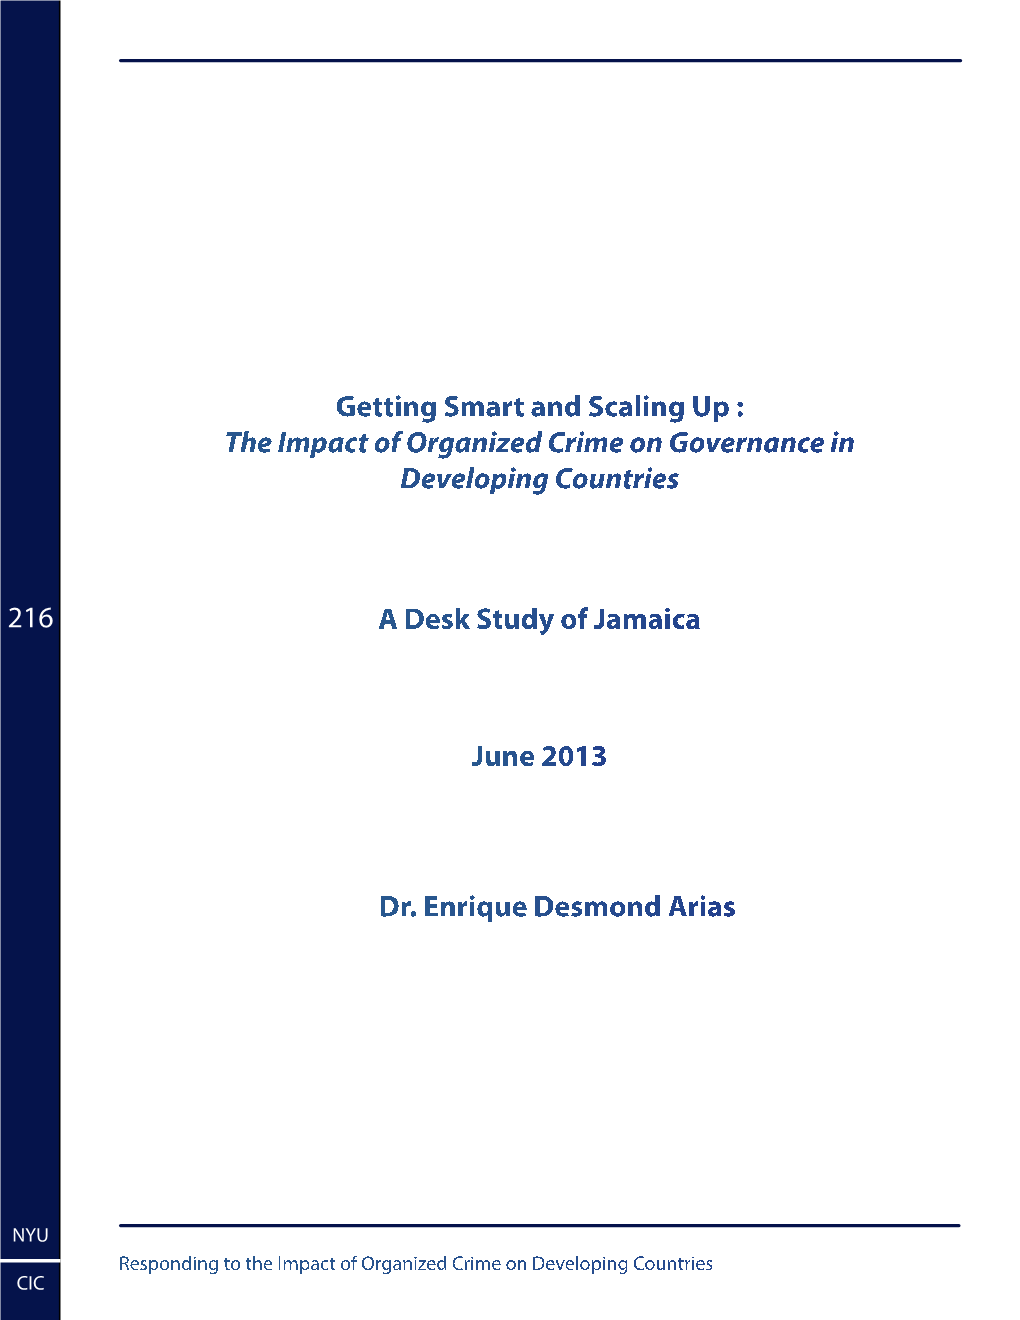 The Impact of Organized Crime on Governance in Developing Countries